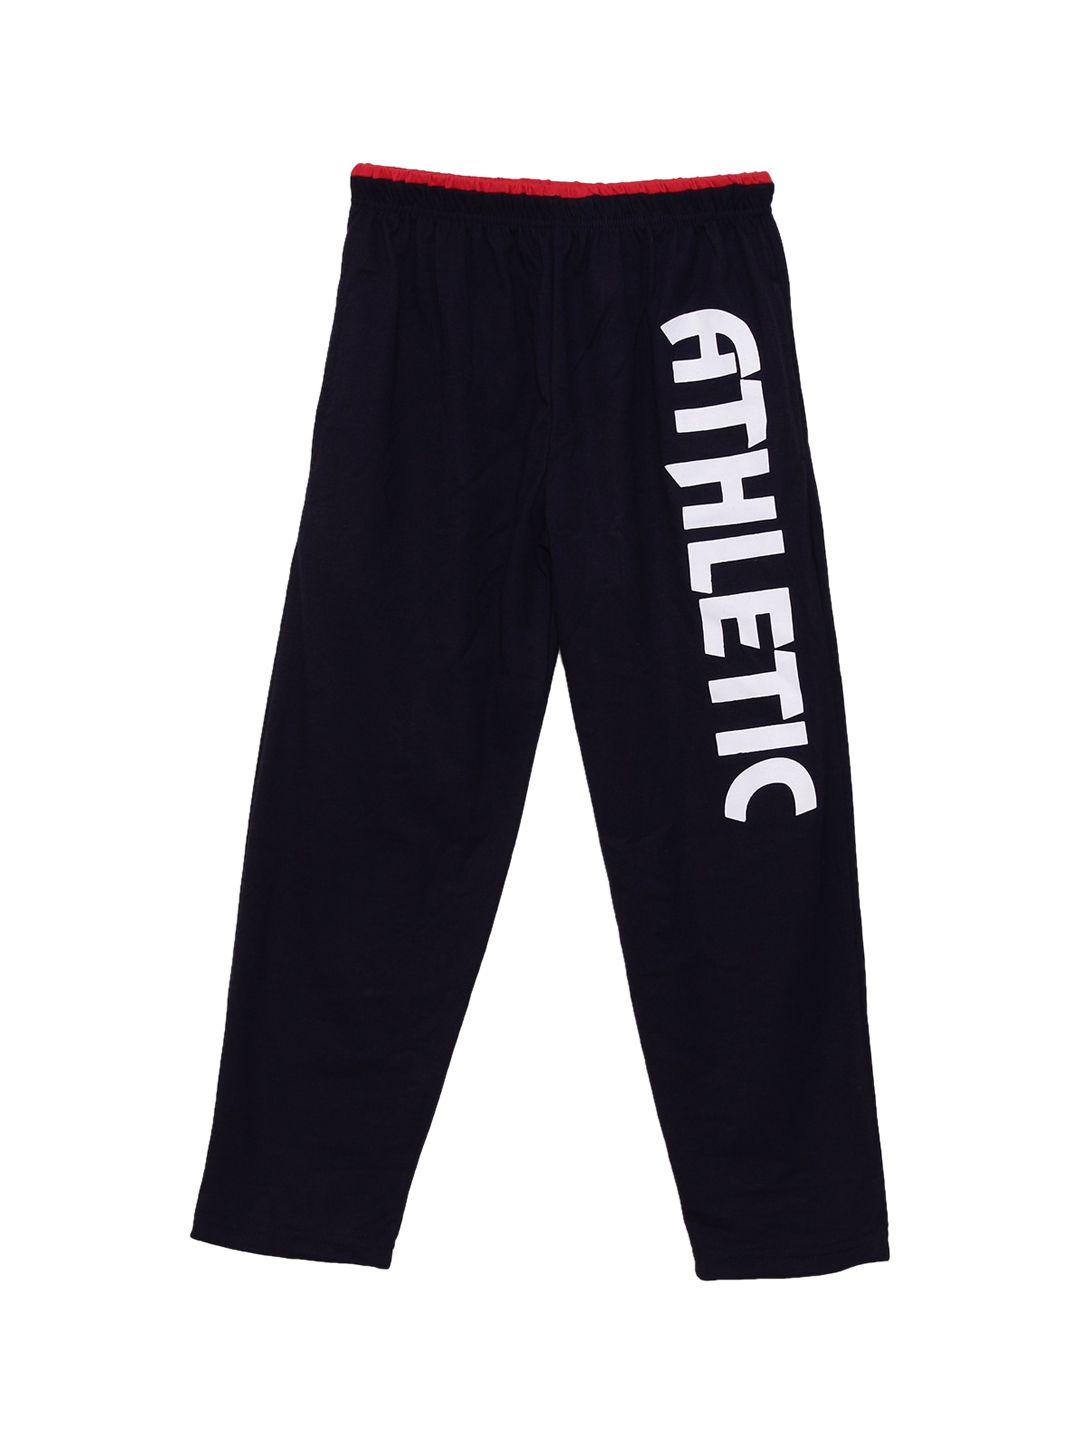 fashionable-boys-navy-blue-&-white-printed-pure-cotton-track-pants